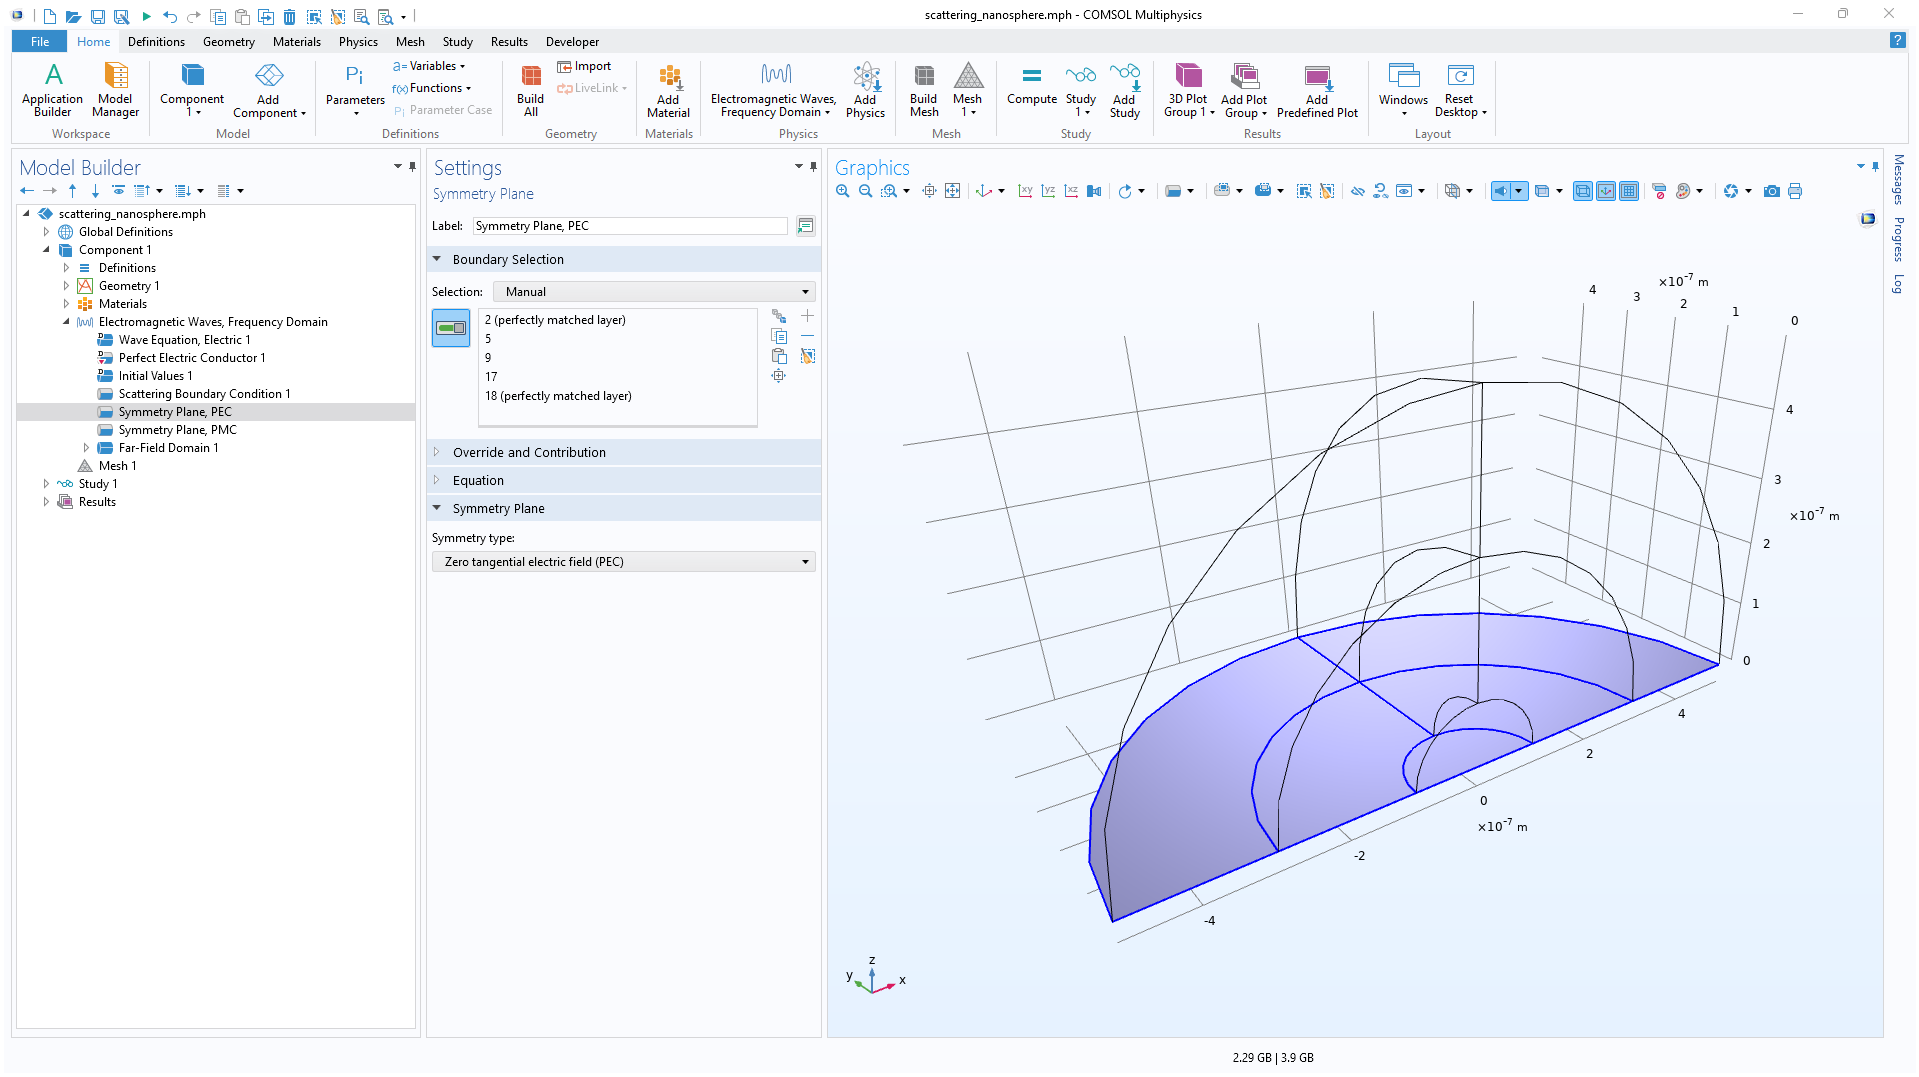 The COMSOL Multiphysics UI showing the Model Builder with a Symmetry Plane node selected, the corresponding Settings window, and the Graphics window with a nanosphere geometry.